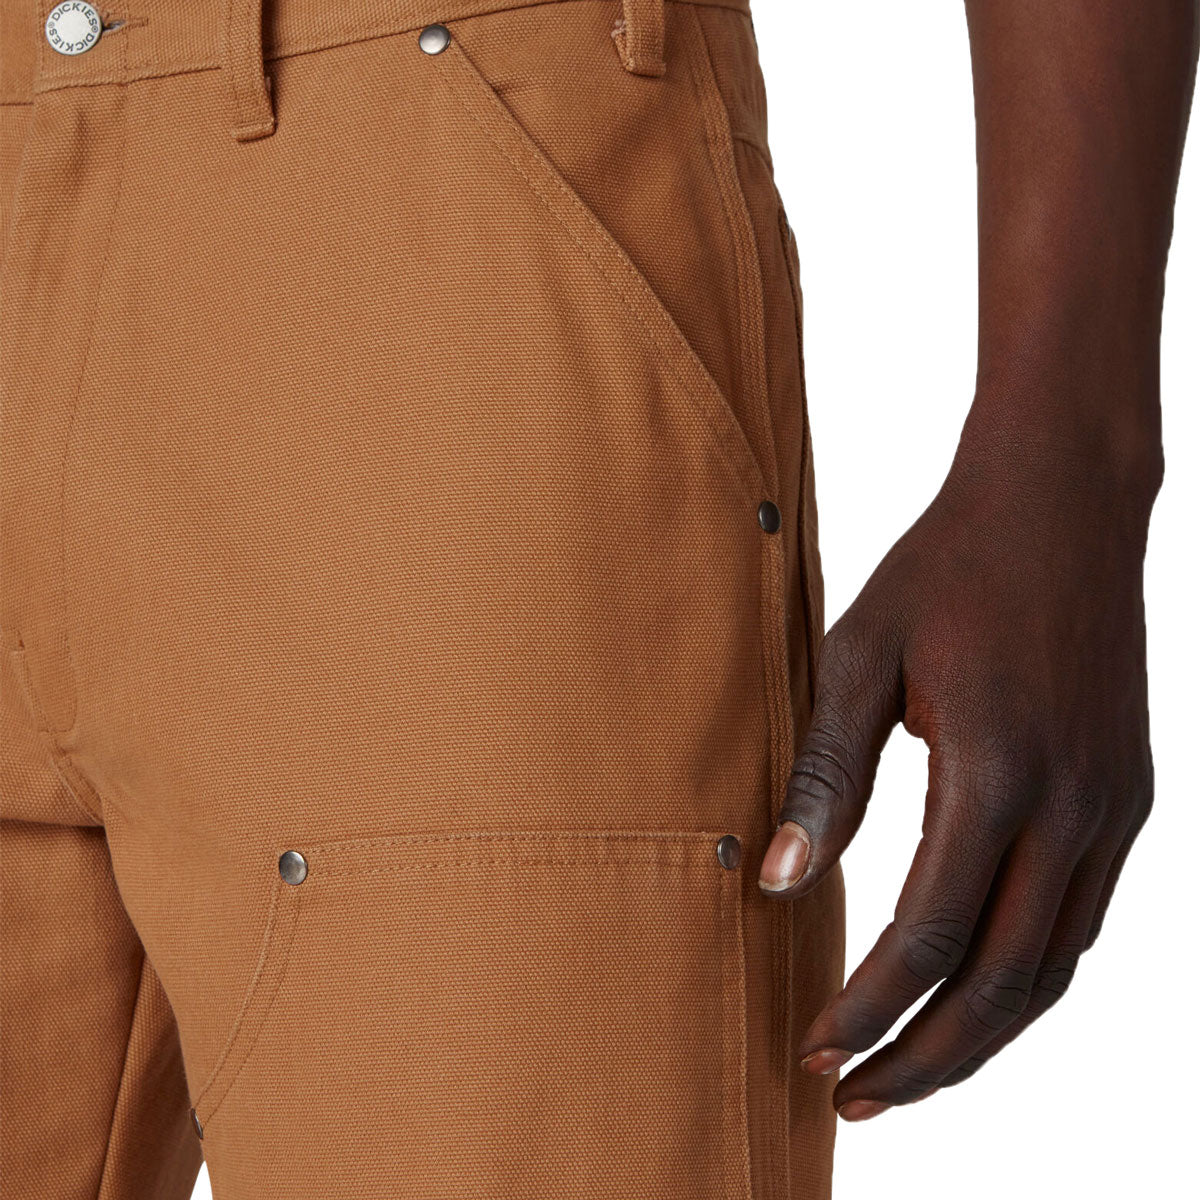 Dickies Double Front Duck Pants - Stonewashed Brown Duck image 4